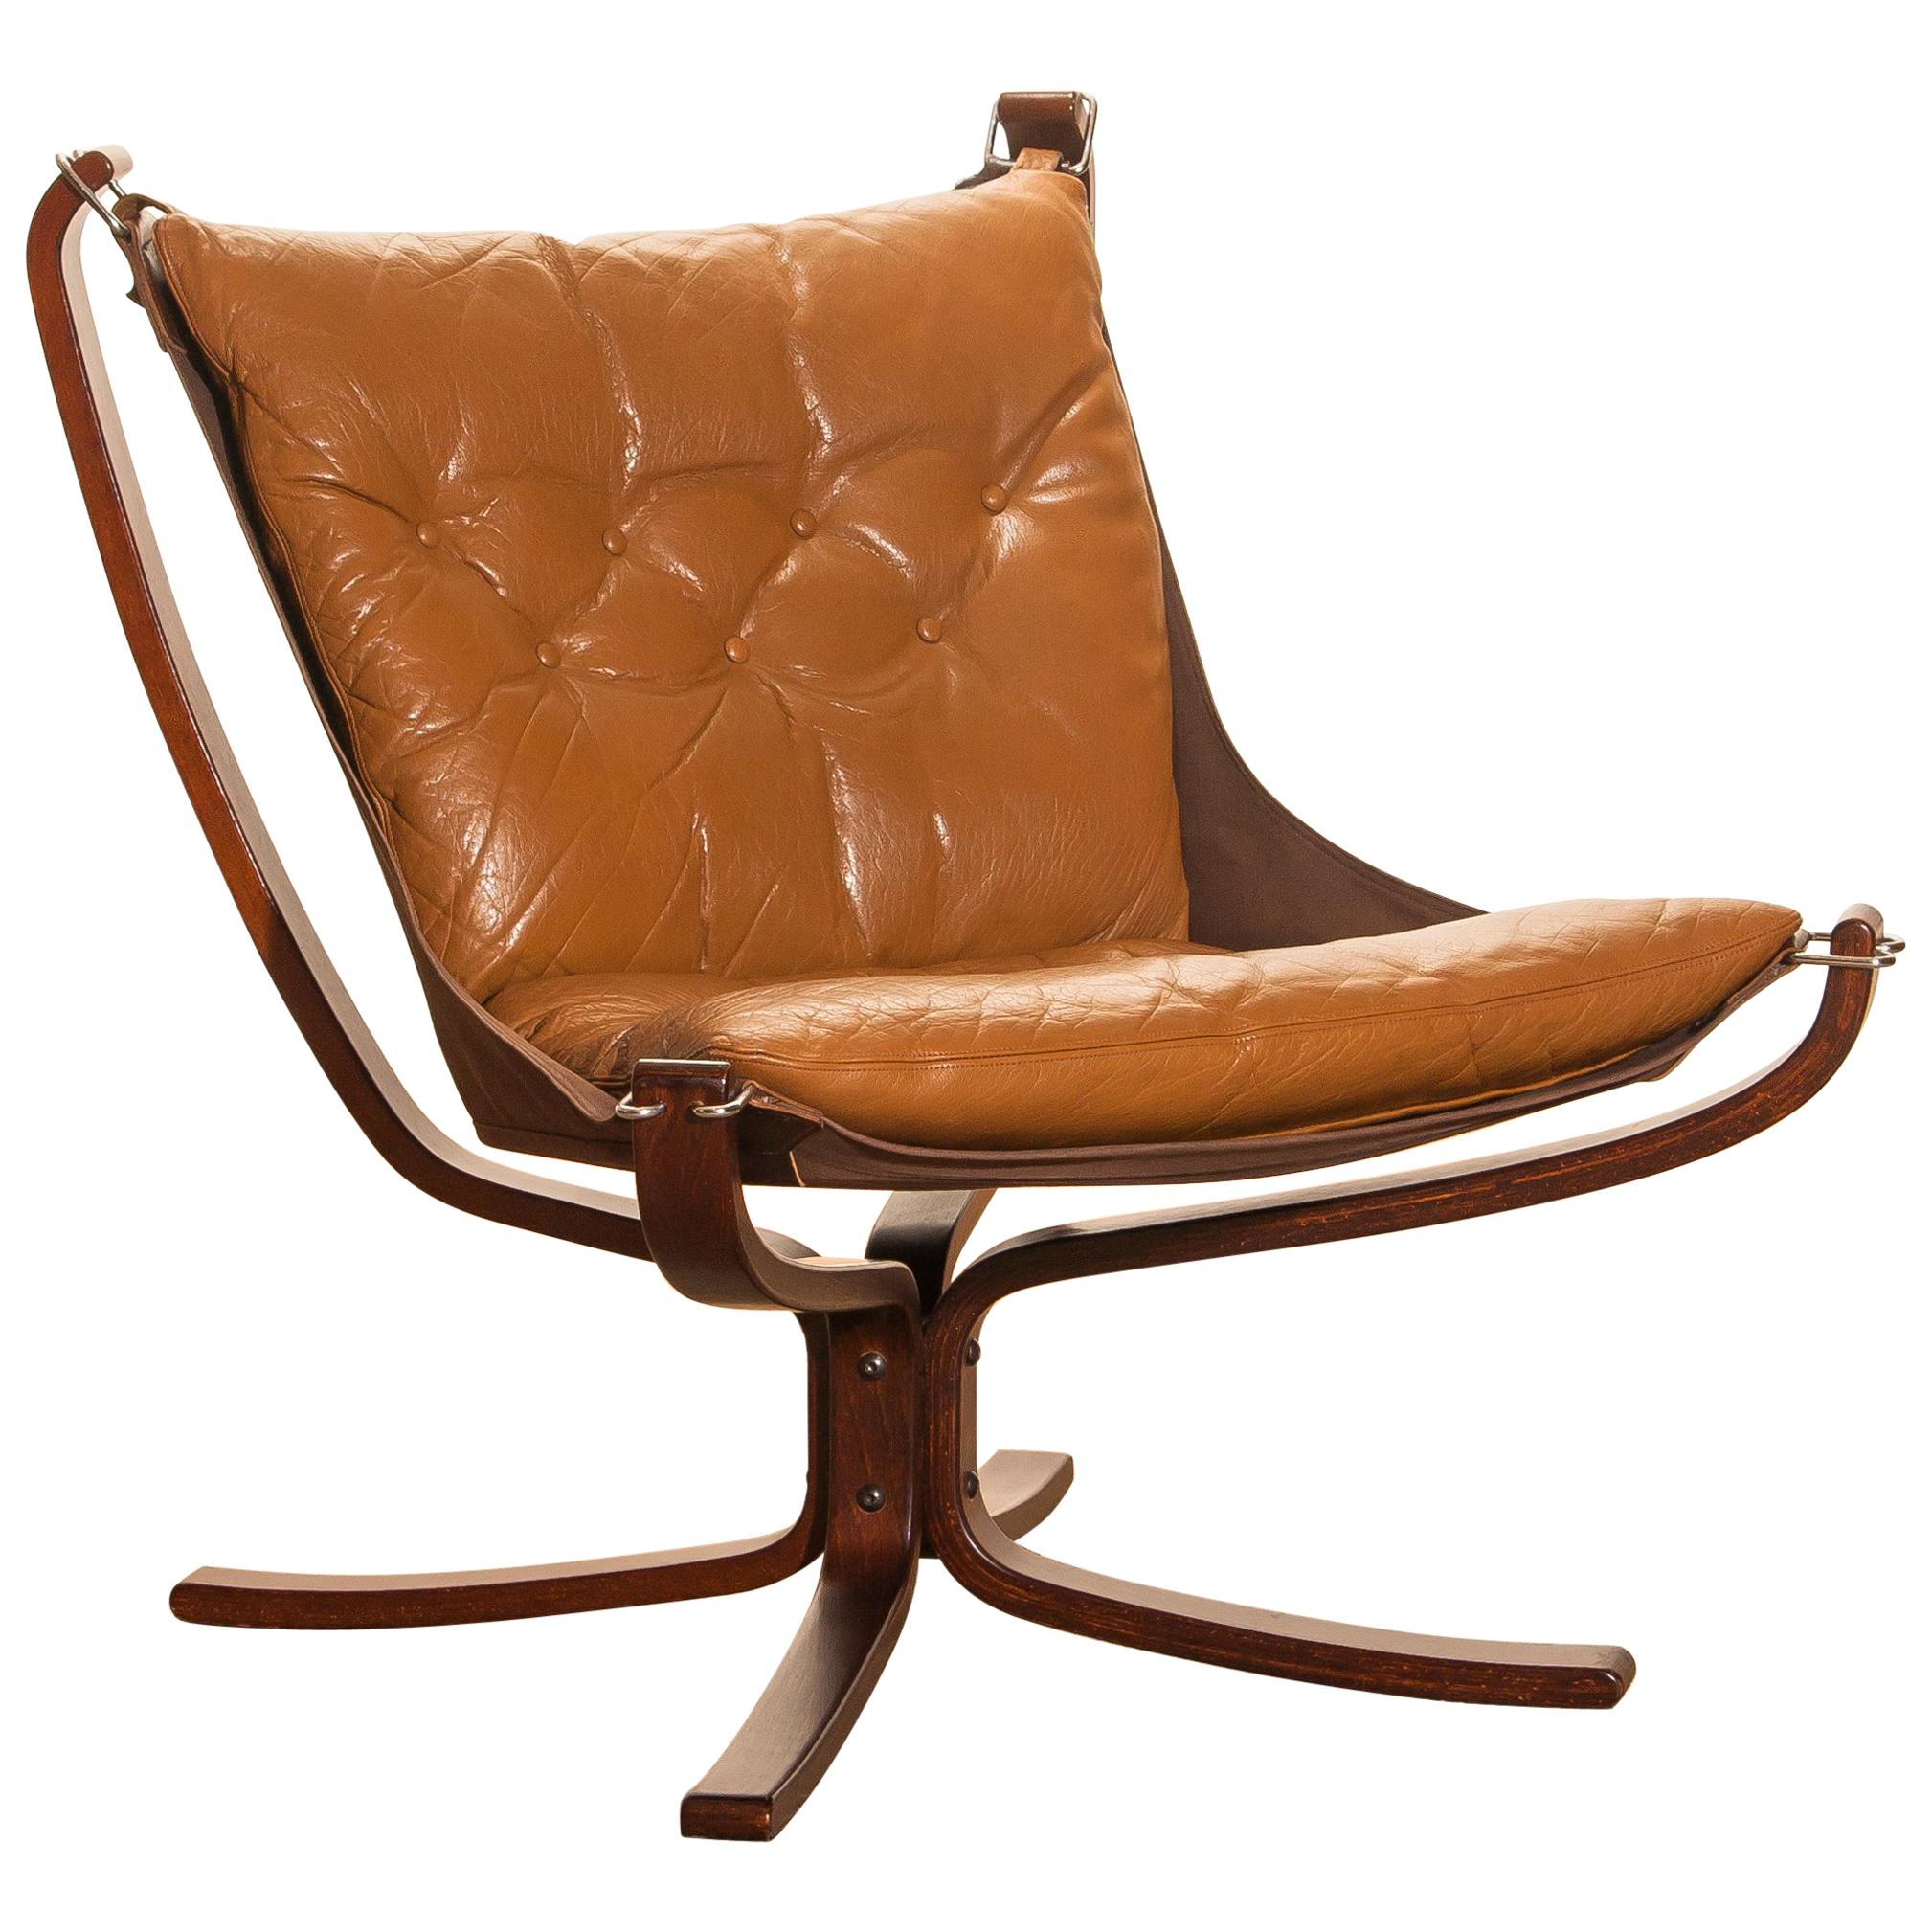 1970s, Camel Leather 'Falcon' Lounge or Easy Chair by Sigurd Ressell